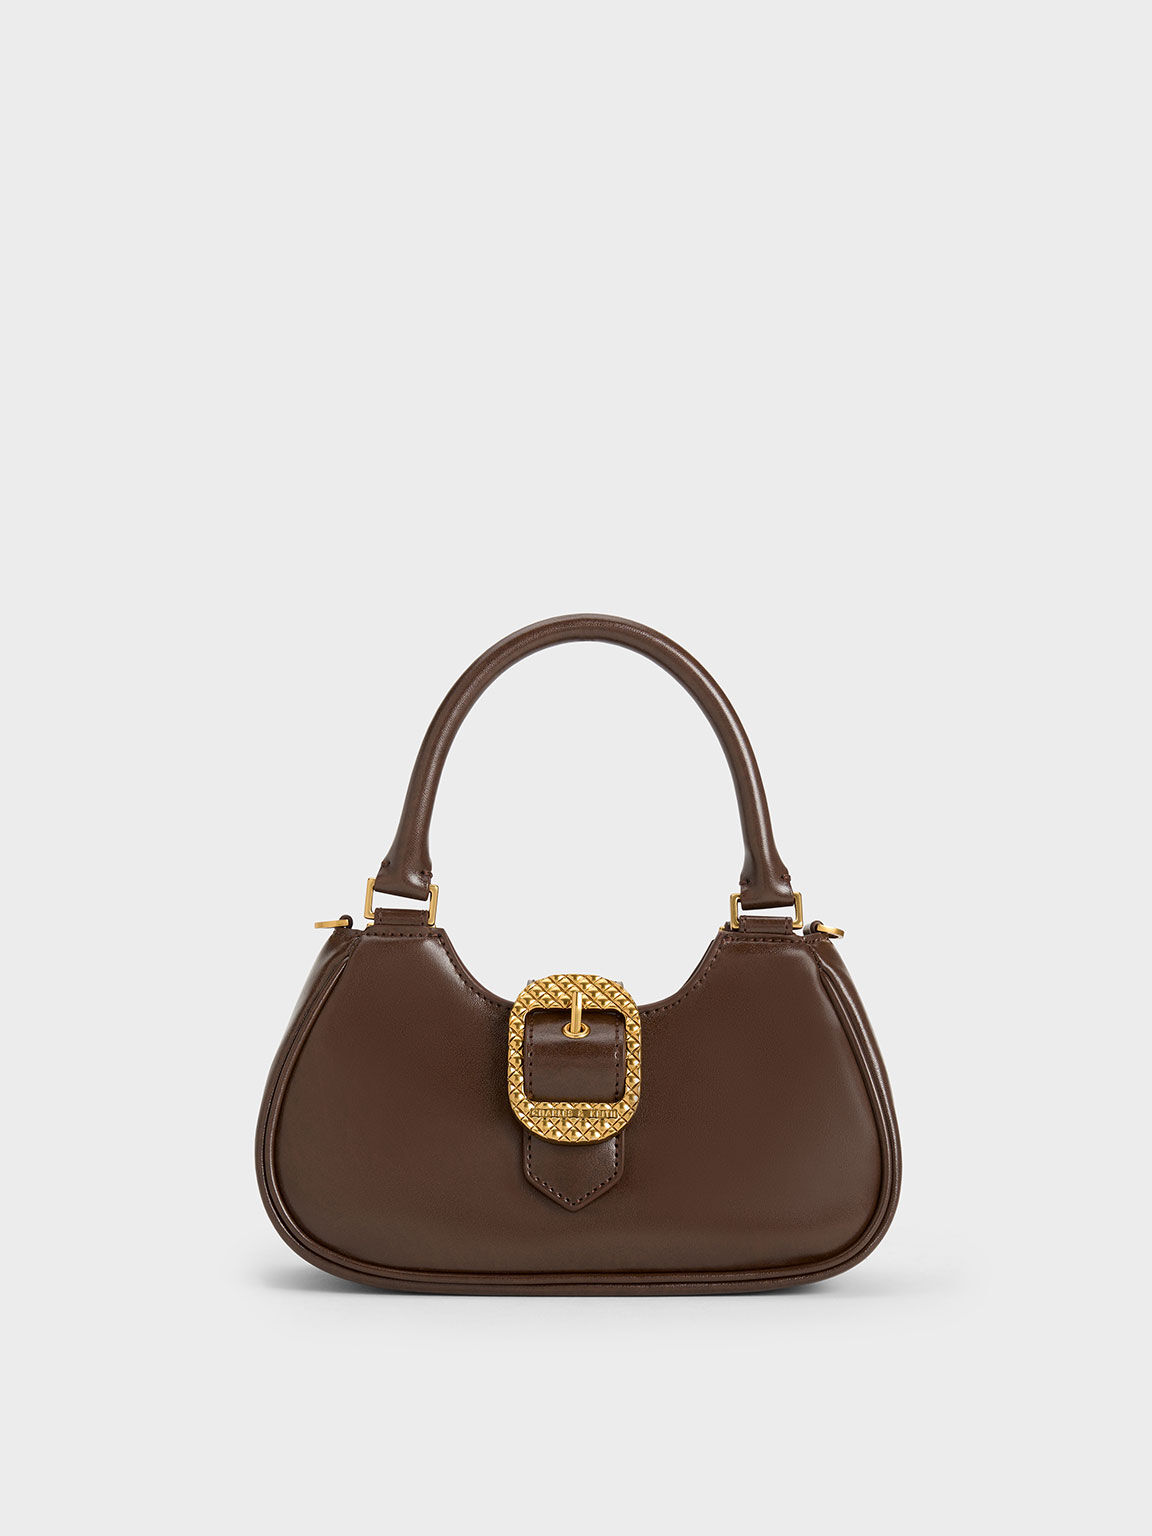 Buy Gucci Baguette Bag Online In India -  India